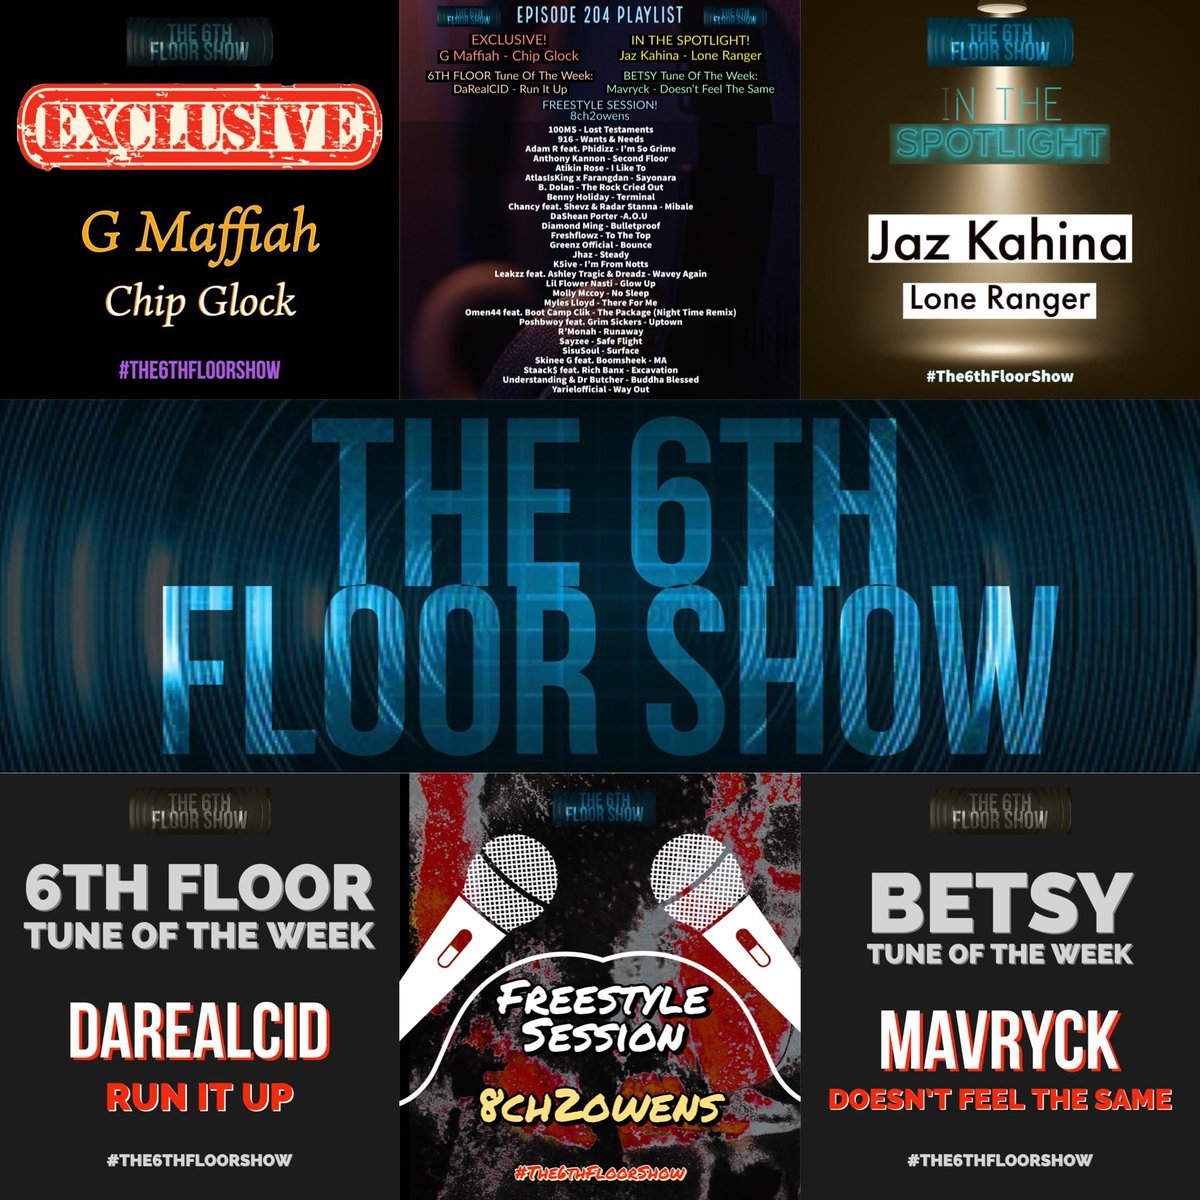 Episode 204 #OutNow feat. #Exclusive from @gmaffiah #InTheSpotlight from @JazKahina & 2 #TuneOfTheWeek picks from DaRealCID & Mavryck #The6thFloorShow 

podcasts.apple.com/gb/podcast/the…

music.amazon.co.uk/podcasts/cde4a…

mediafire.com/file/47buojnp0…

deezer.page.link/JJMZh6uMDiypGA…

tun.in/tv6Yfv